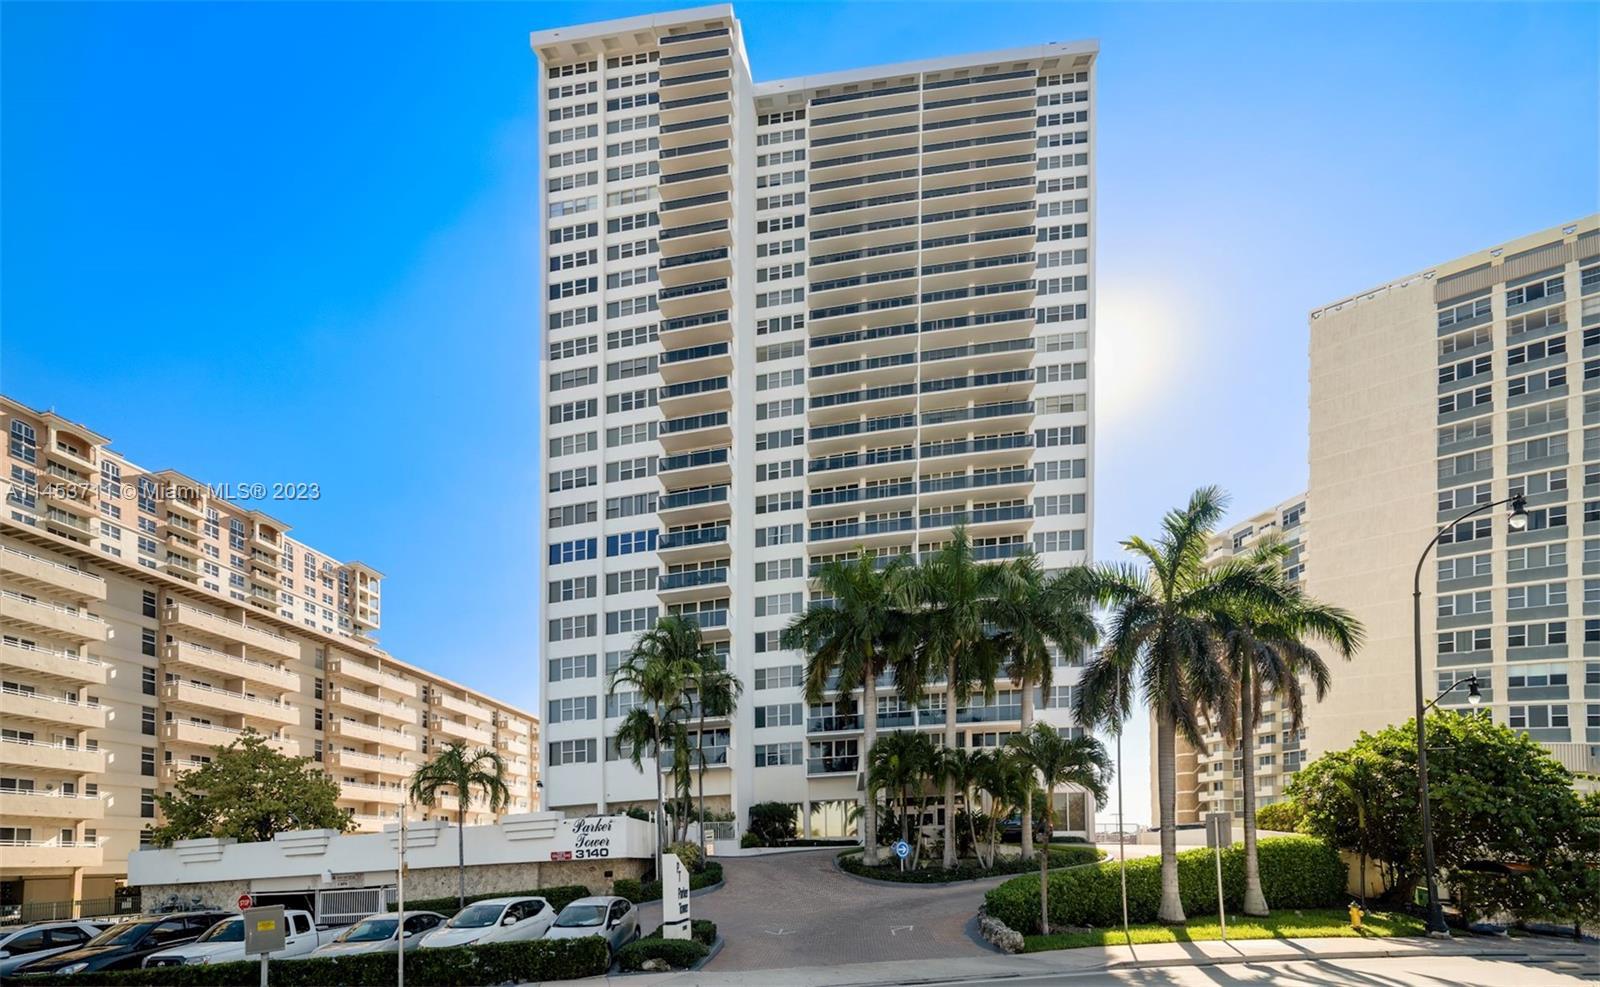 COME AND ENJOY THE WARM SANDY BEACH OF HALLANDALE BEACH, FLORIDA *****  THE VIEW OF THE UNIT IS THE 